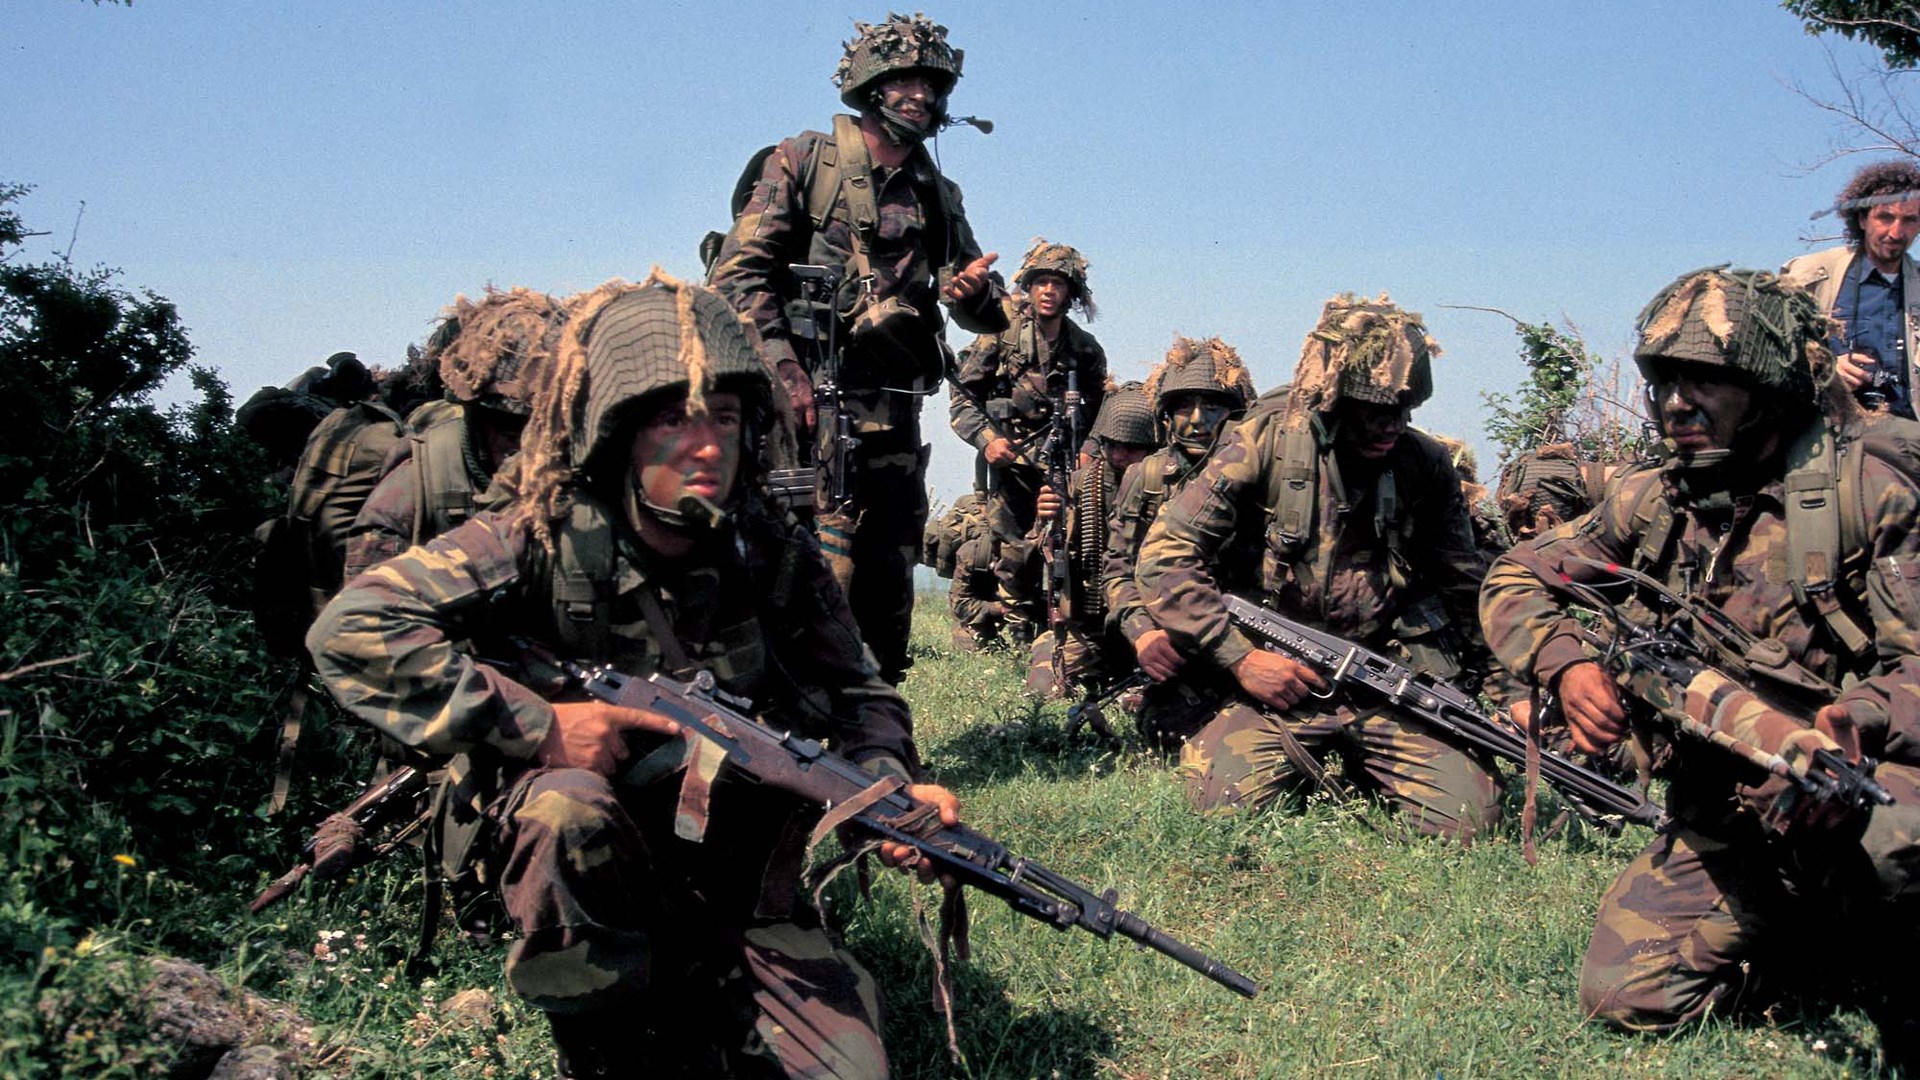 Italian paratroopers on a field training exercise in 1990. Note that one man is armed with the Beretta MG 42/59 (MG3) machine gun and that the others are armed with the BM-59 Paracadutisti rifles.